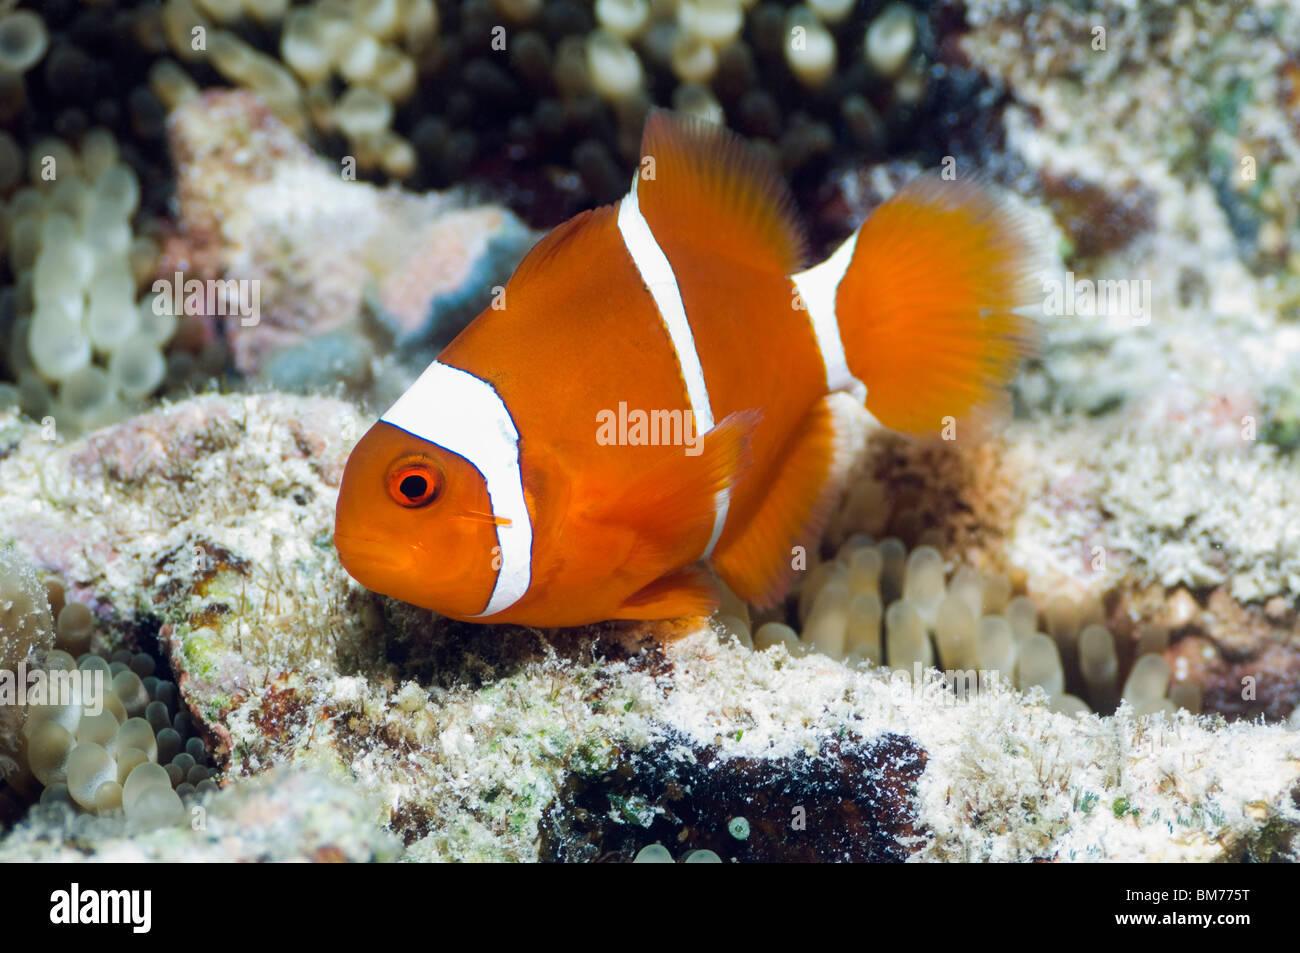 Spinecheek anemonefish (Premnas biaculeatus) exclusively with Bubble tip anemone (Entacmaea quadricolor).  Indonesia. Stock Photo